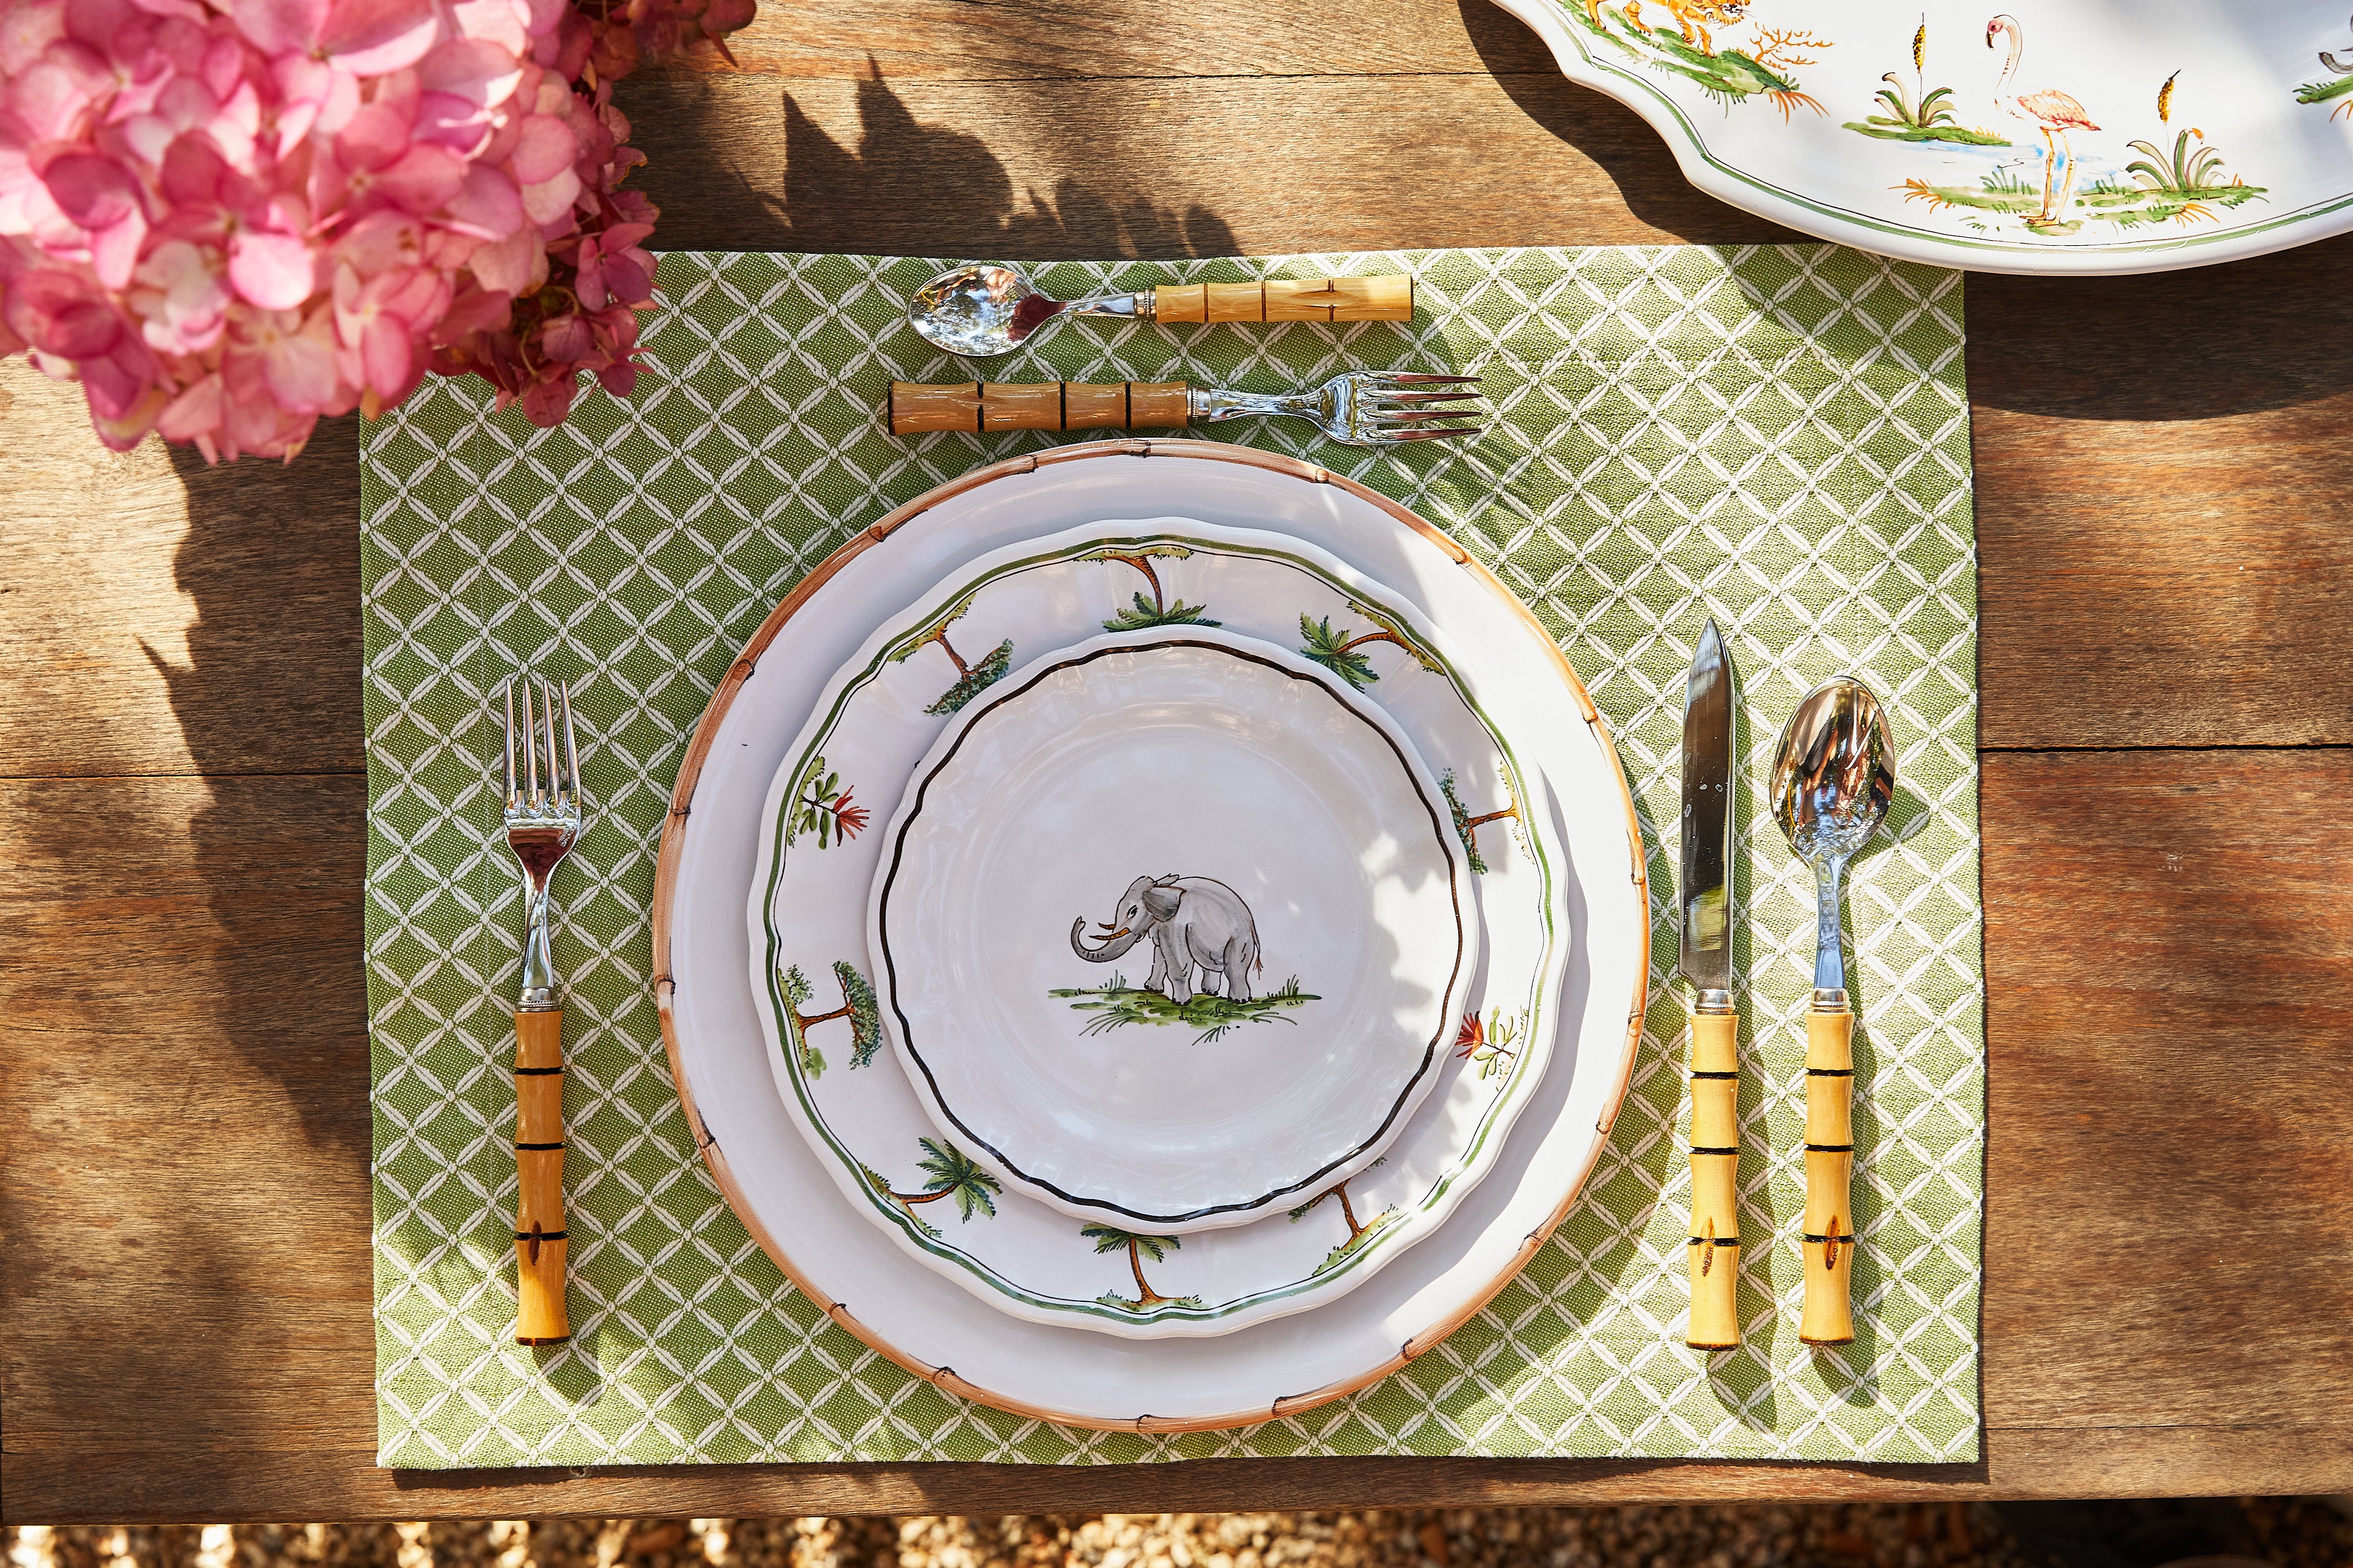 Styled table setting with Animaux de la Savane Dessert/Side Plate